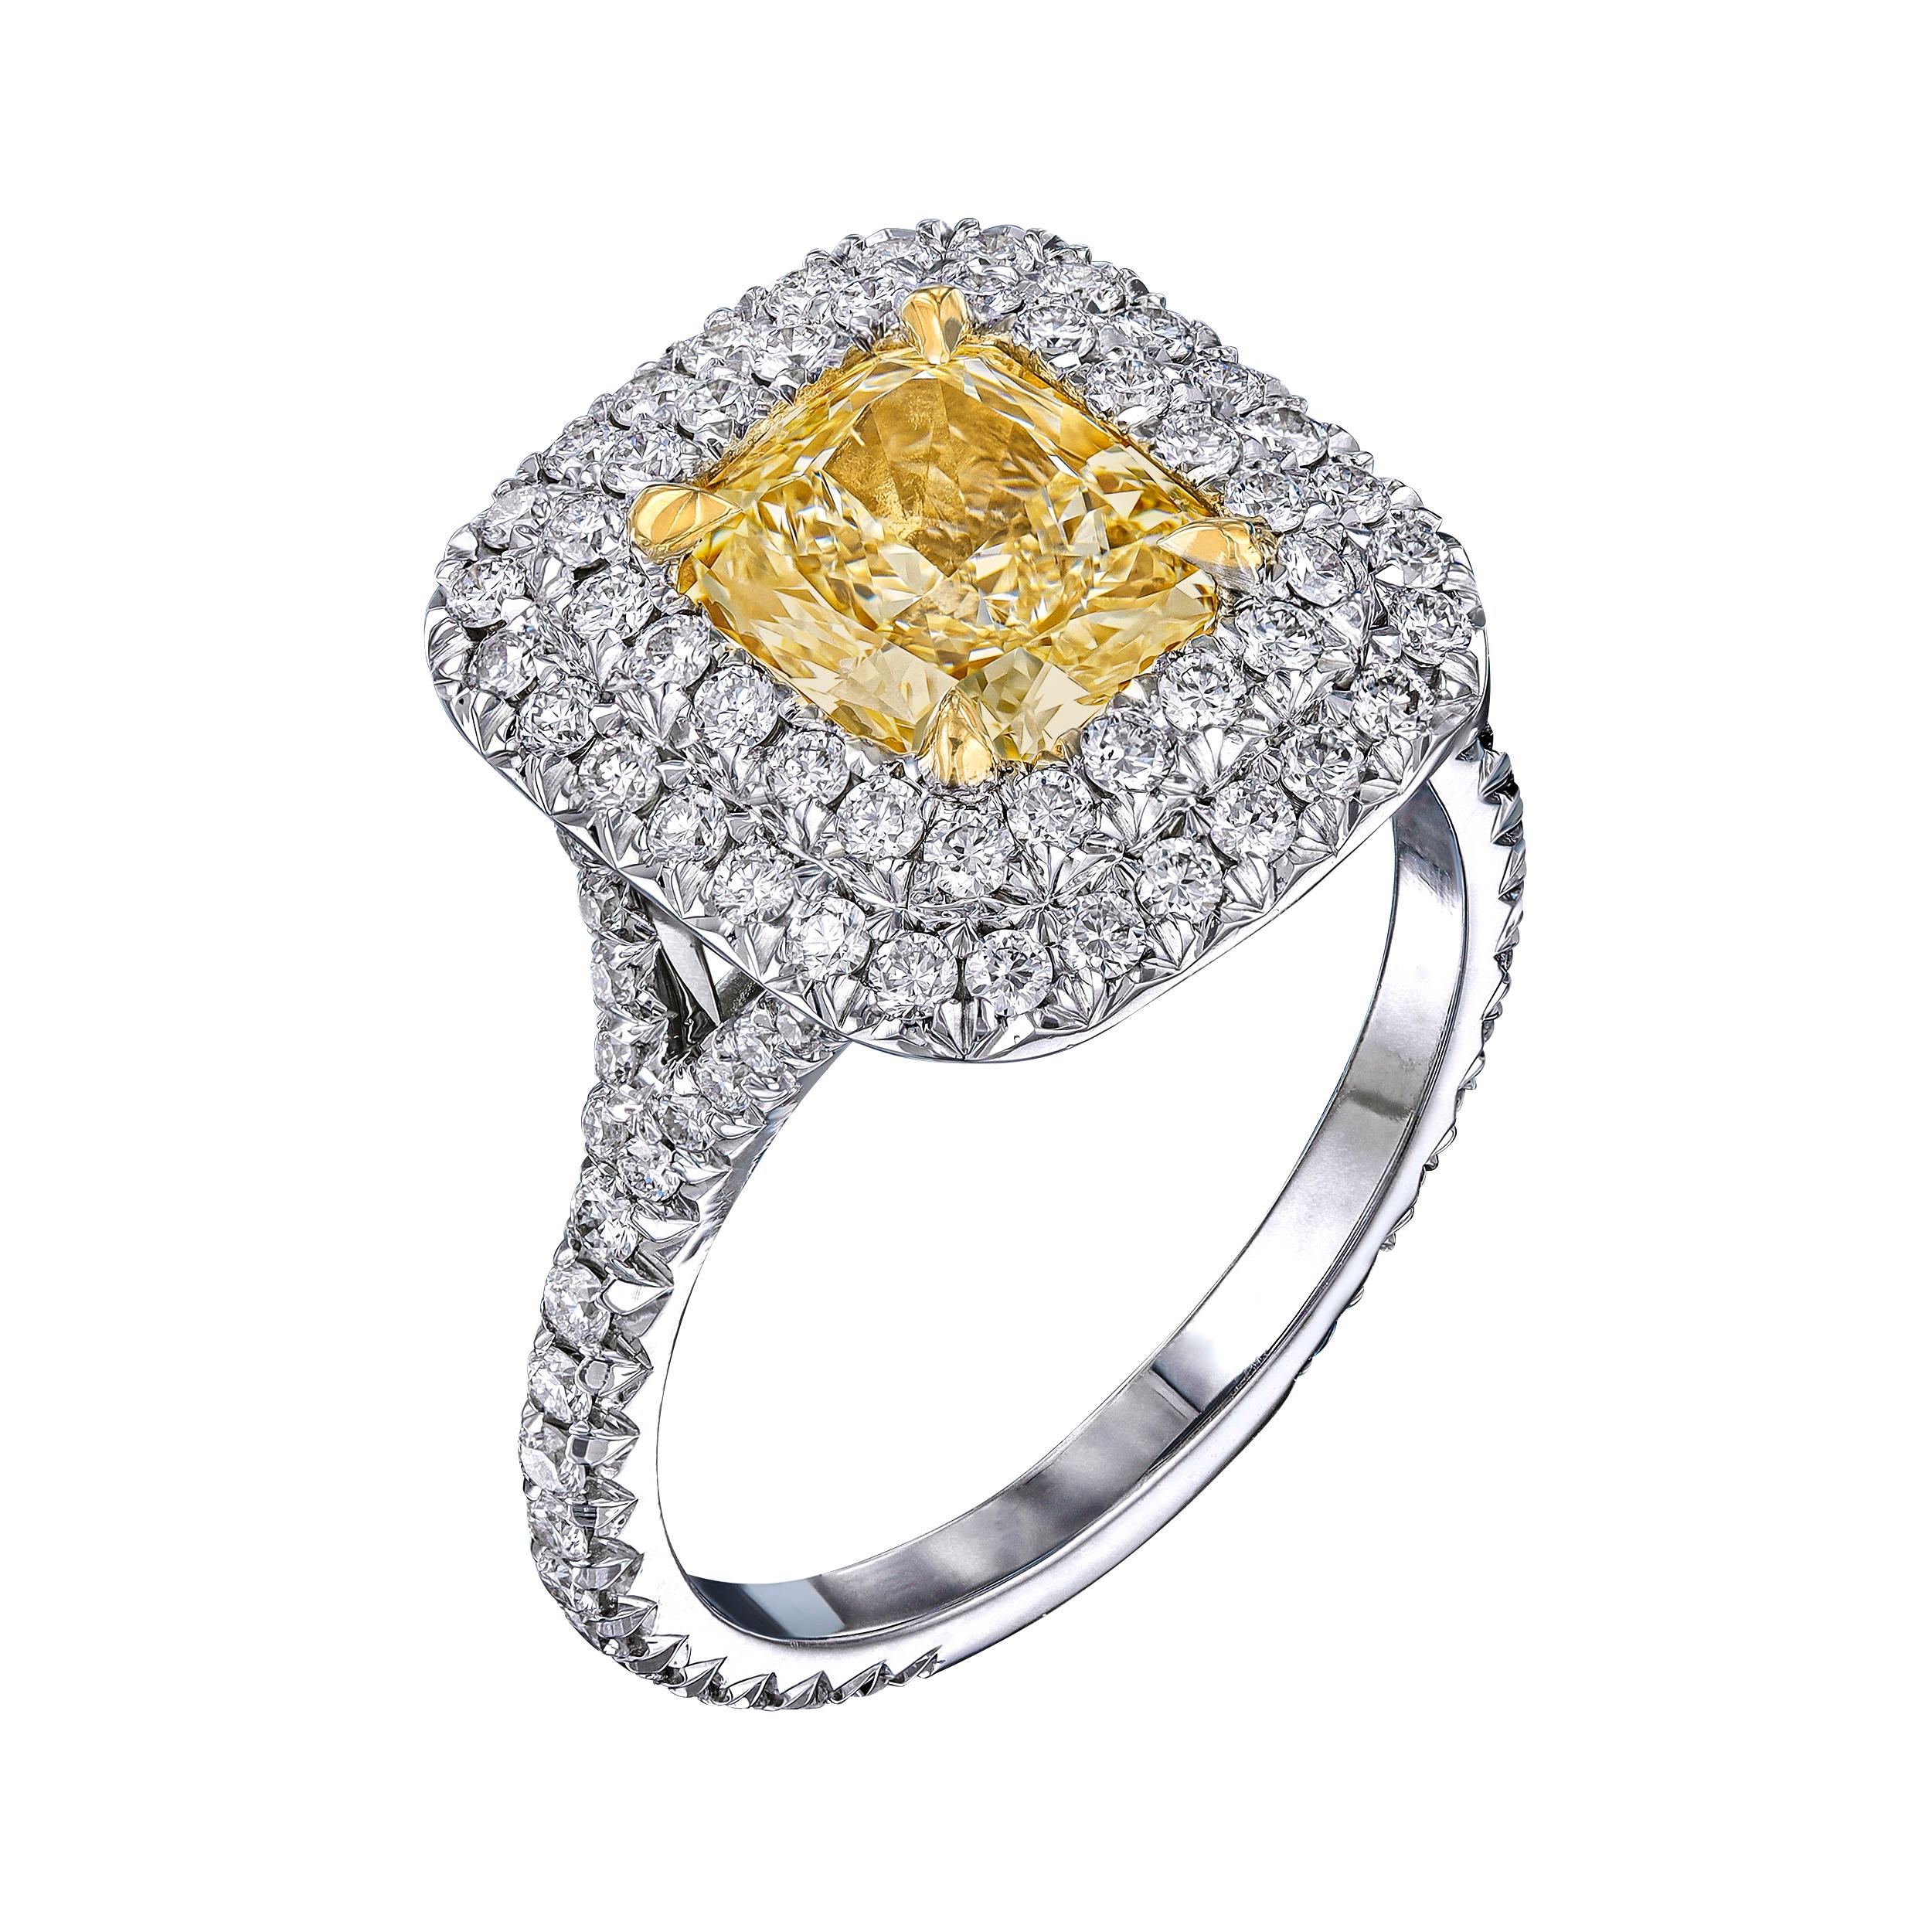 Diamond ring with GIA certificate, no.17420514. Details are: Center stone: 2.03ct / Radiant cut Fancy Light Yellow diamond VS1, 7.57 x 6.58 x 4.44mm. / Pave set side diamonds: .97ct, Brilliant round: F-G VS2-SI1.  Total carat weight: 3.10ct. Metal: